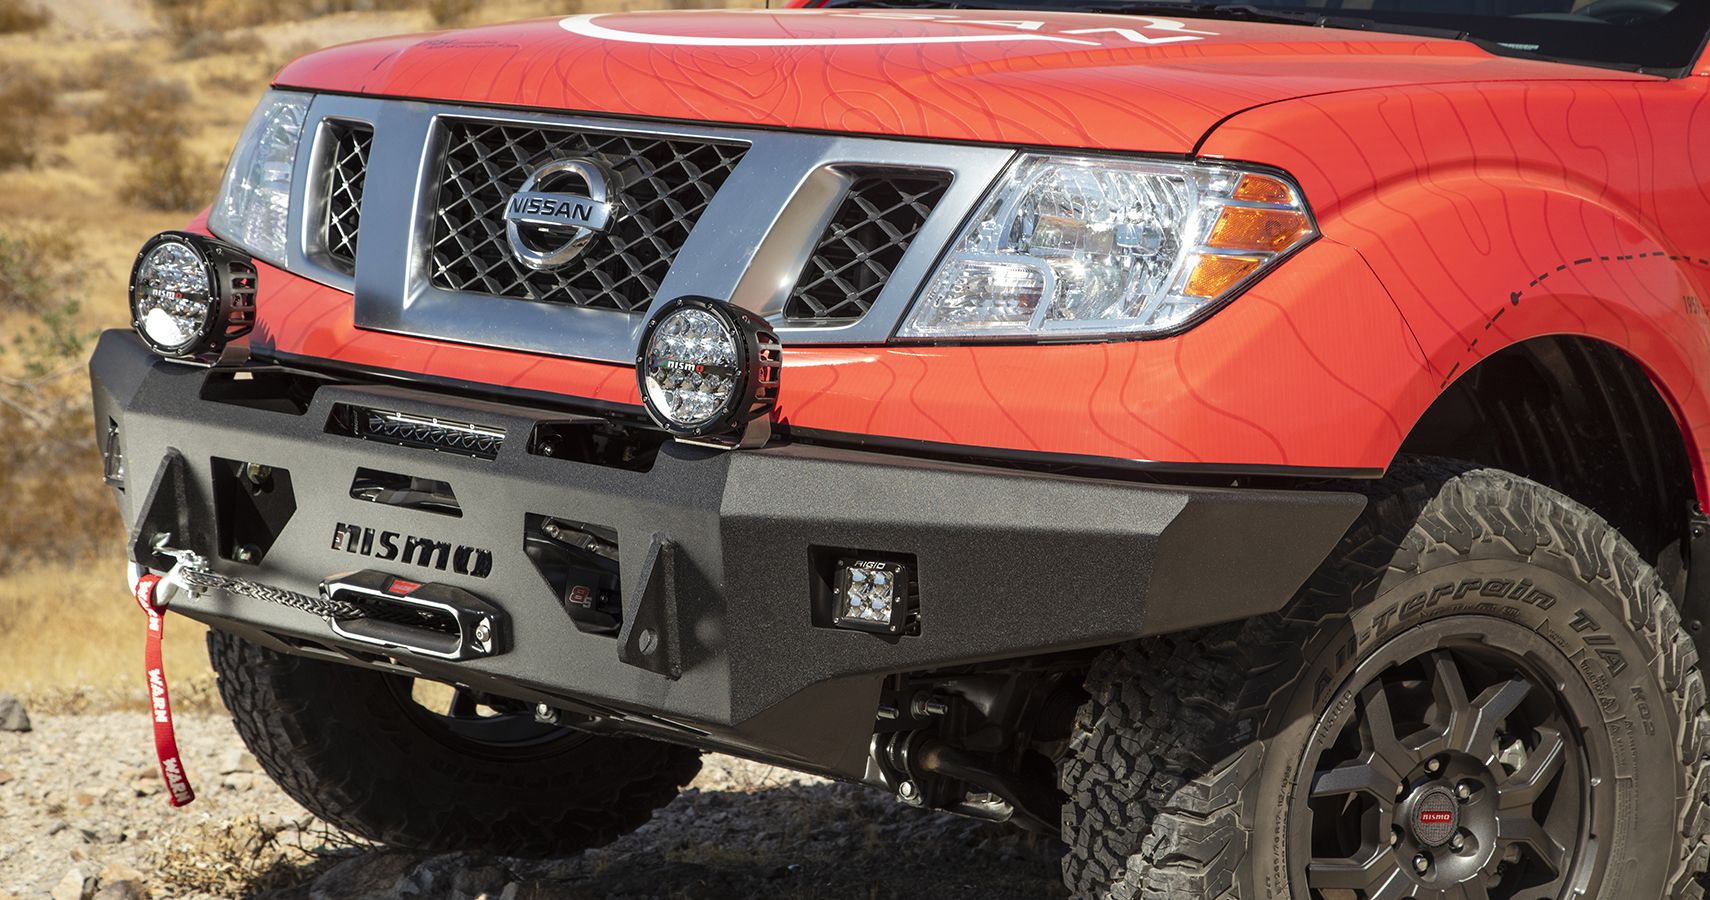 NISMO off-road bumper and lighting